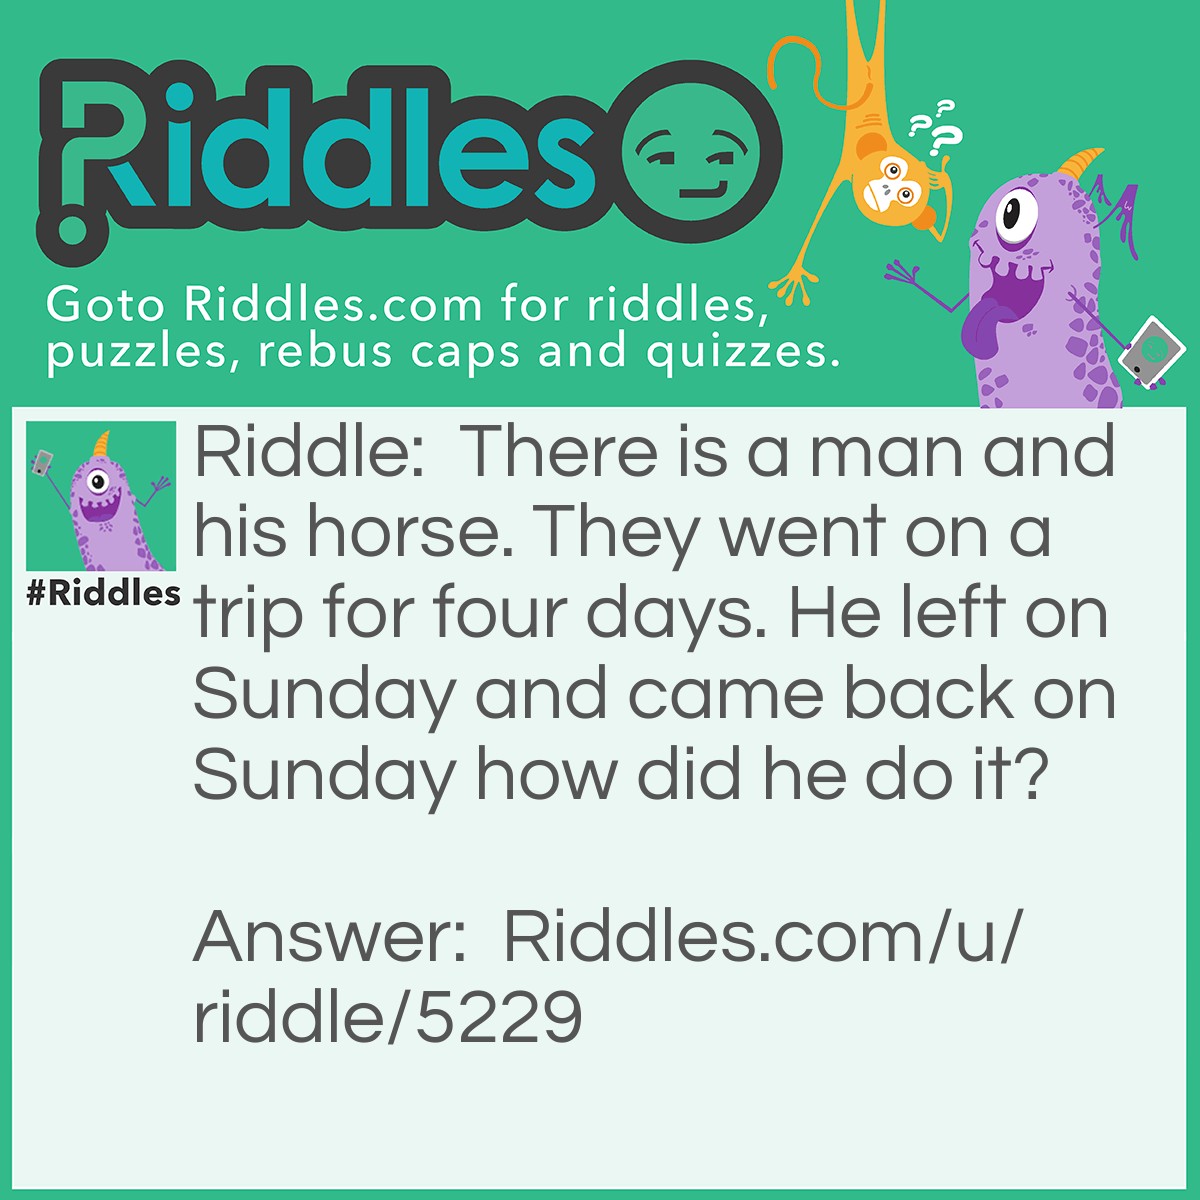 Riddle: There is a man and his horse. They went on a trip for four days. He left on Sunday and came back on Sunday how did he do it? Answer: The horses name was Sunday!